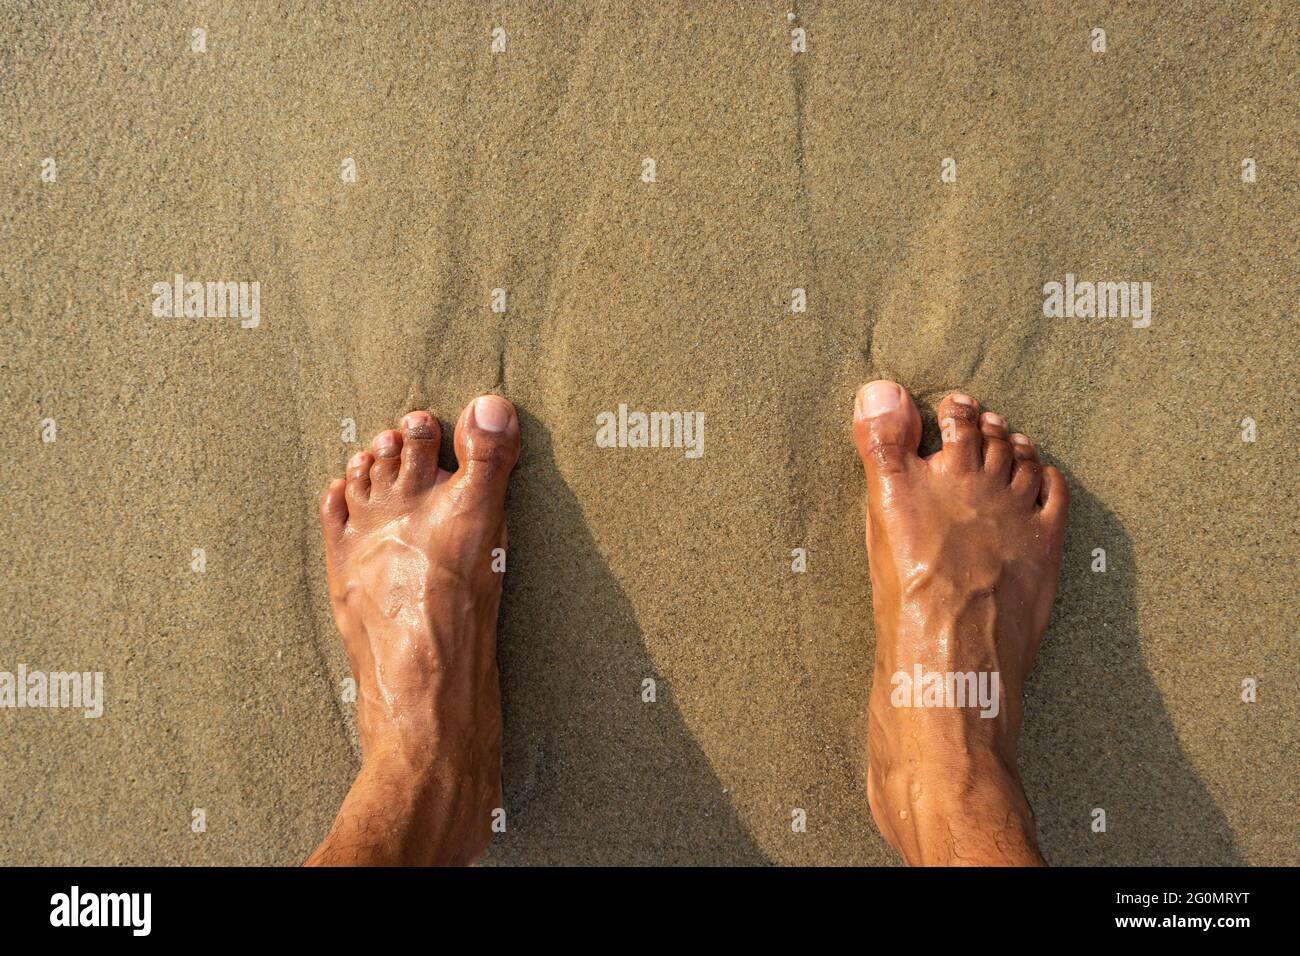 human feet feeling nature isolated on sandy beach showing the human love of nature. The true expression of human life. Stock Photo